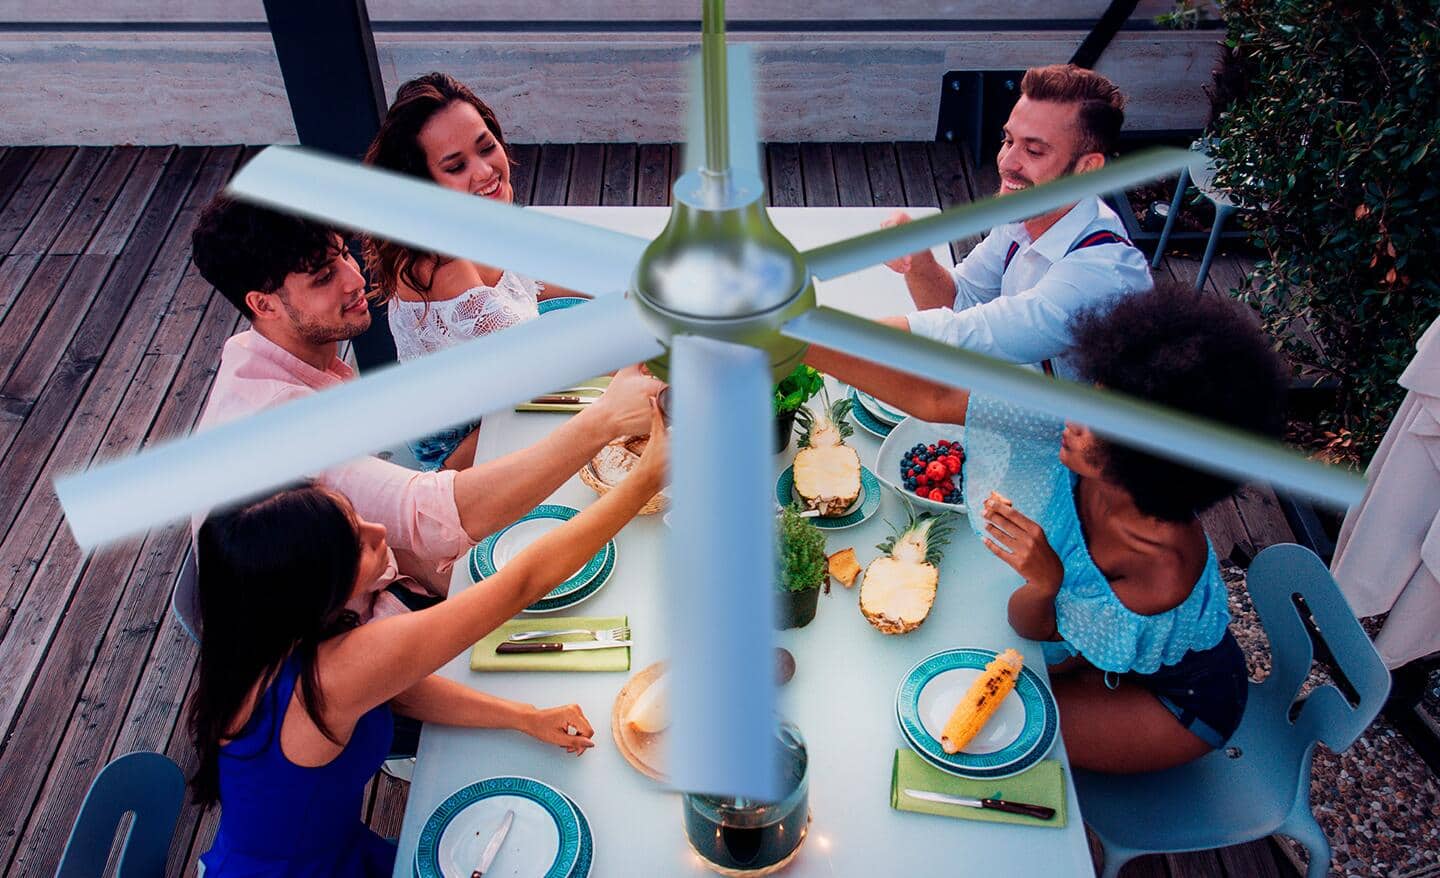 A family dining under a chrome ceiling fan.